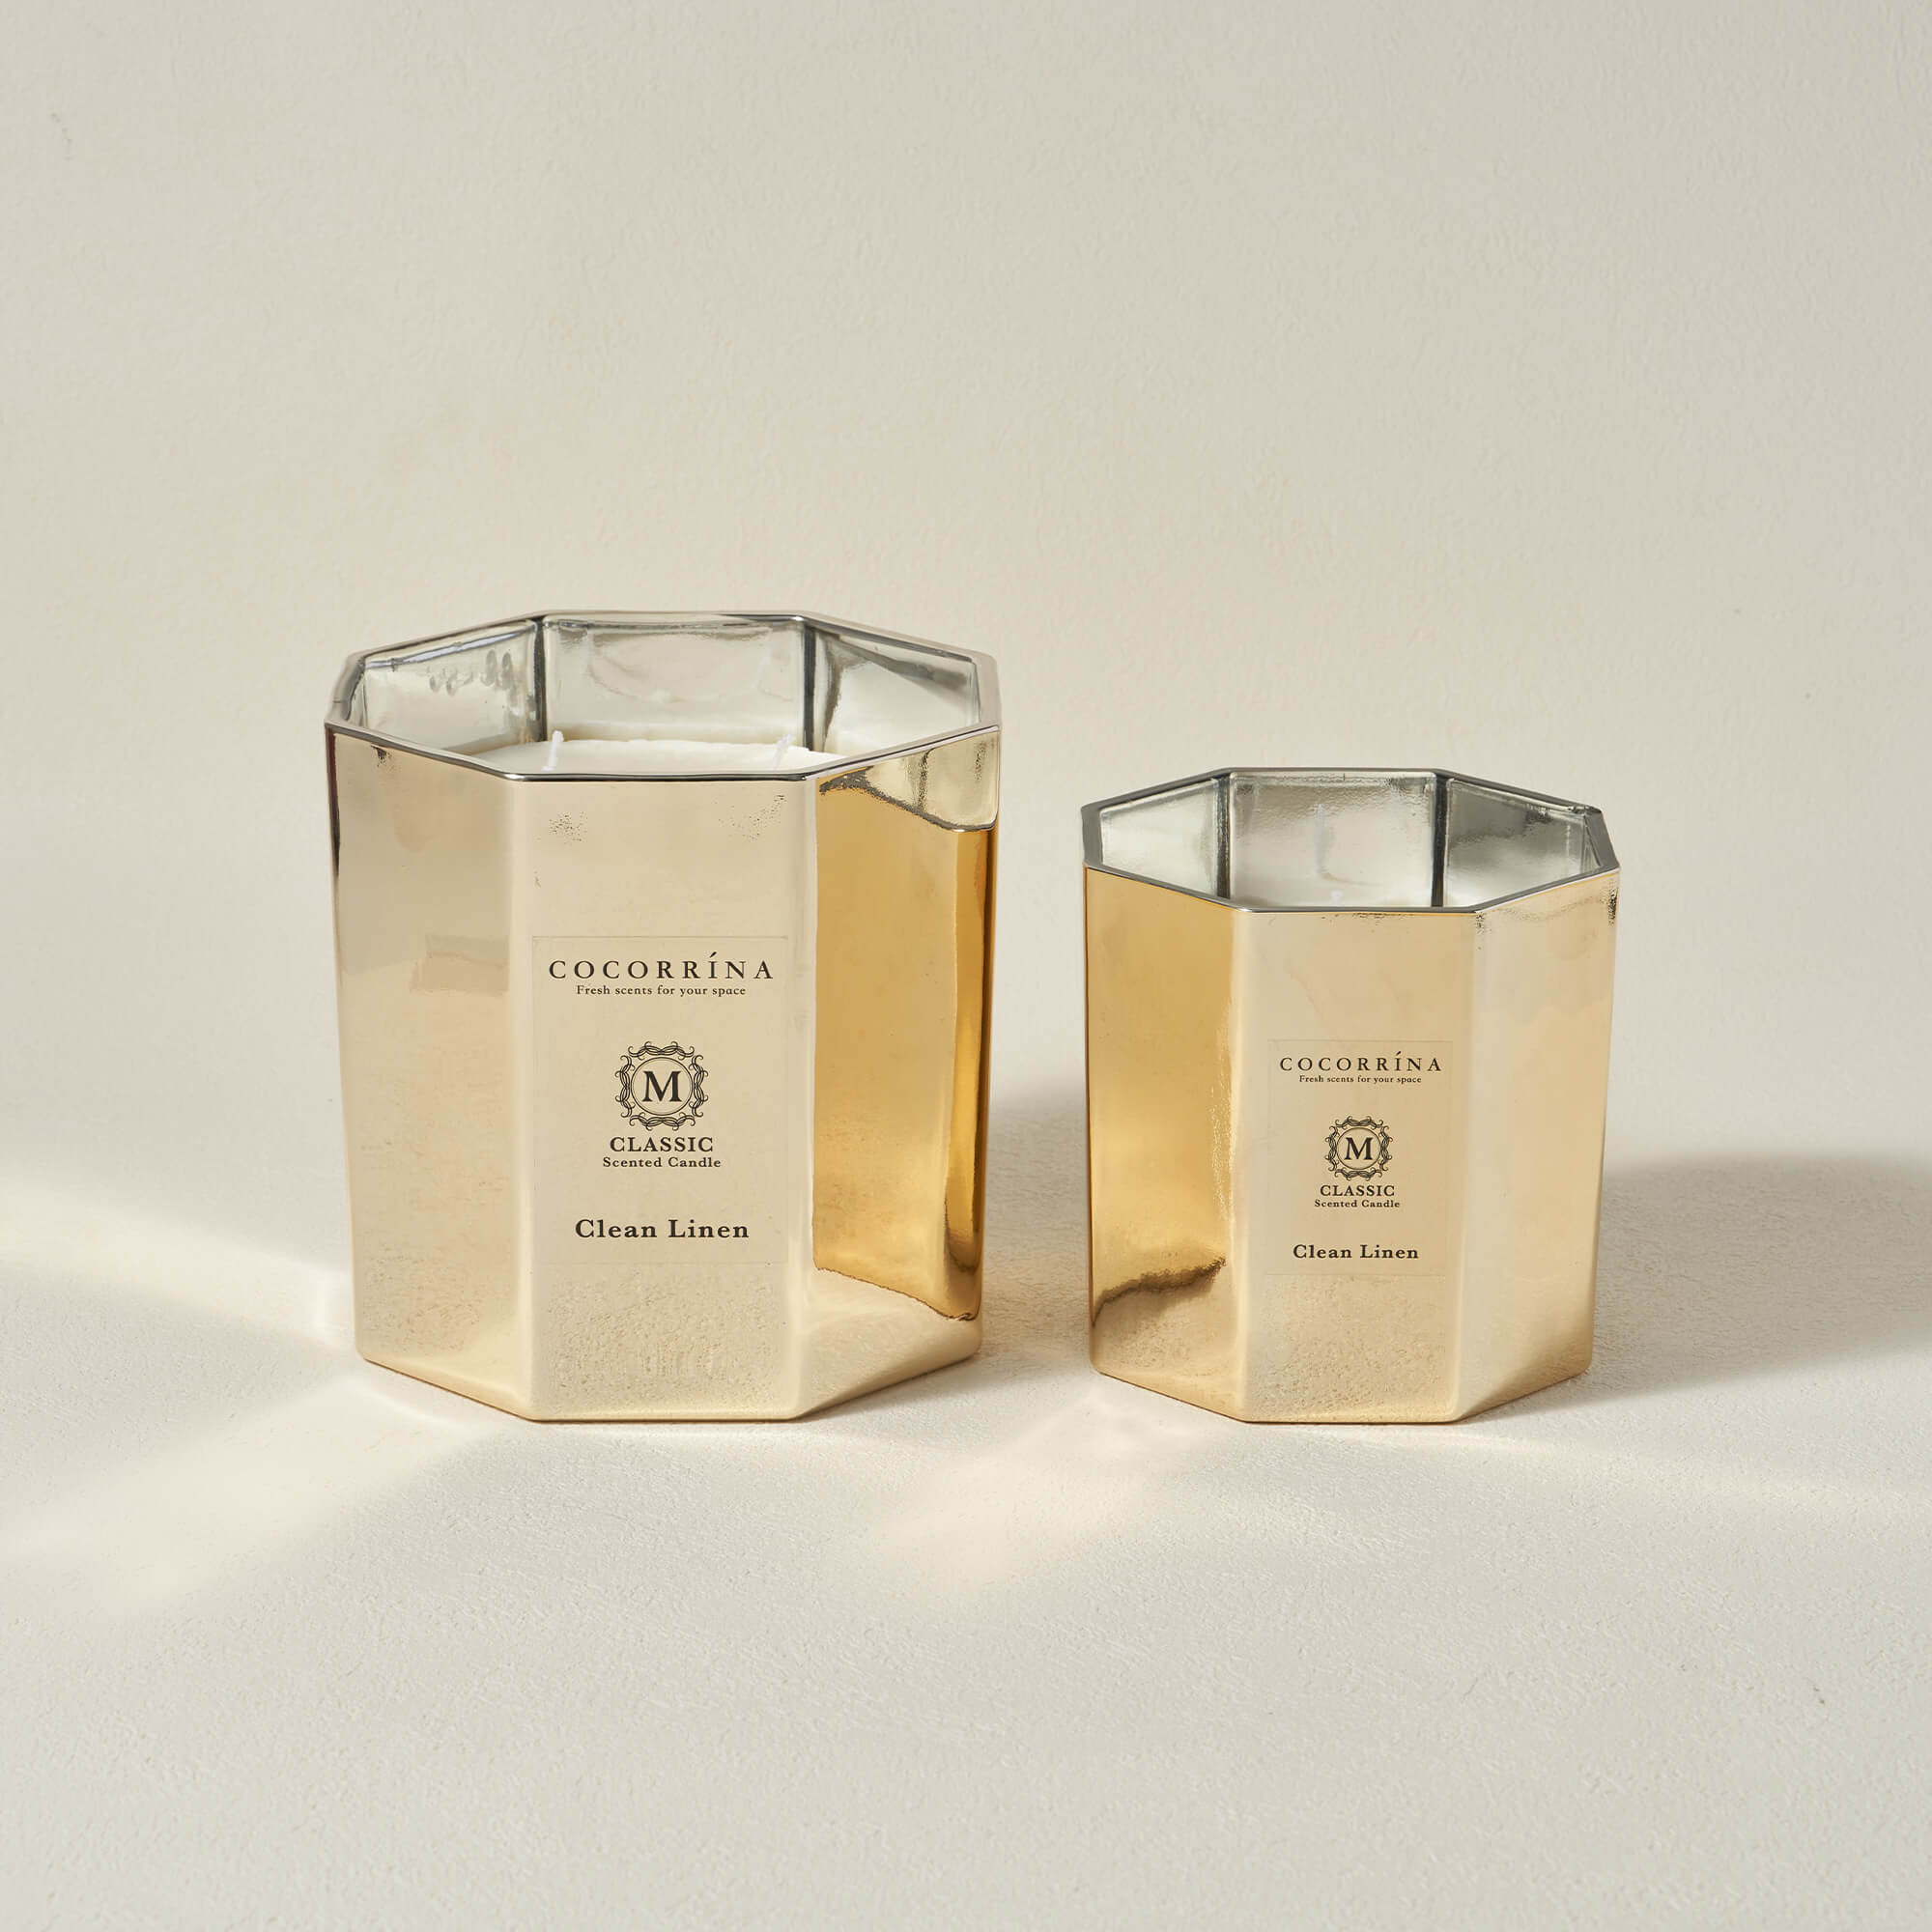 COCORRÍNA 1300g Clean Linen Classica Series Candle